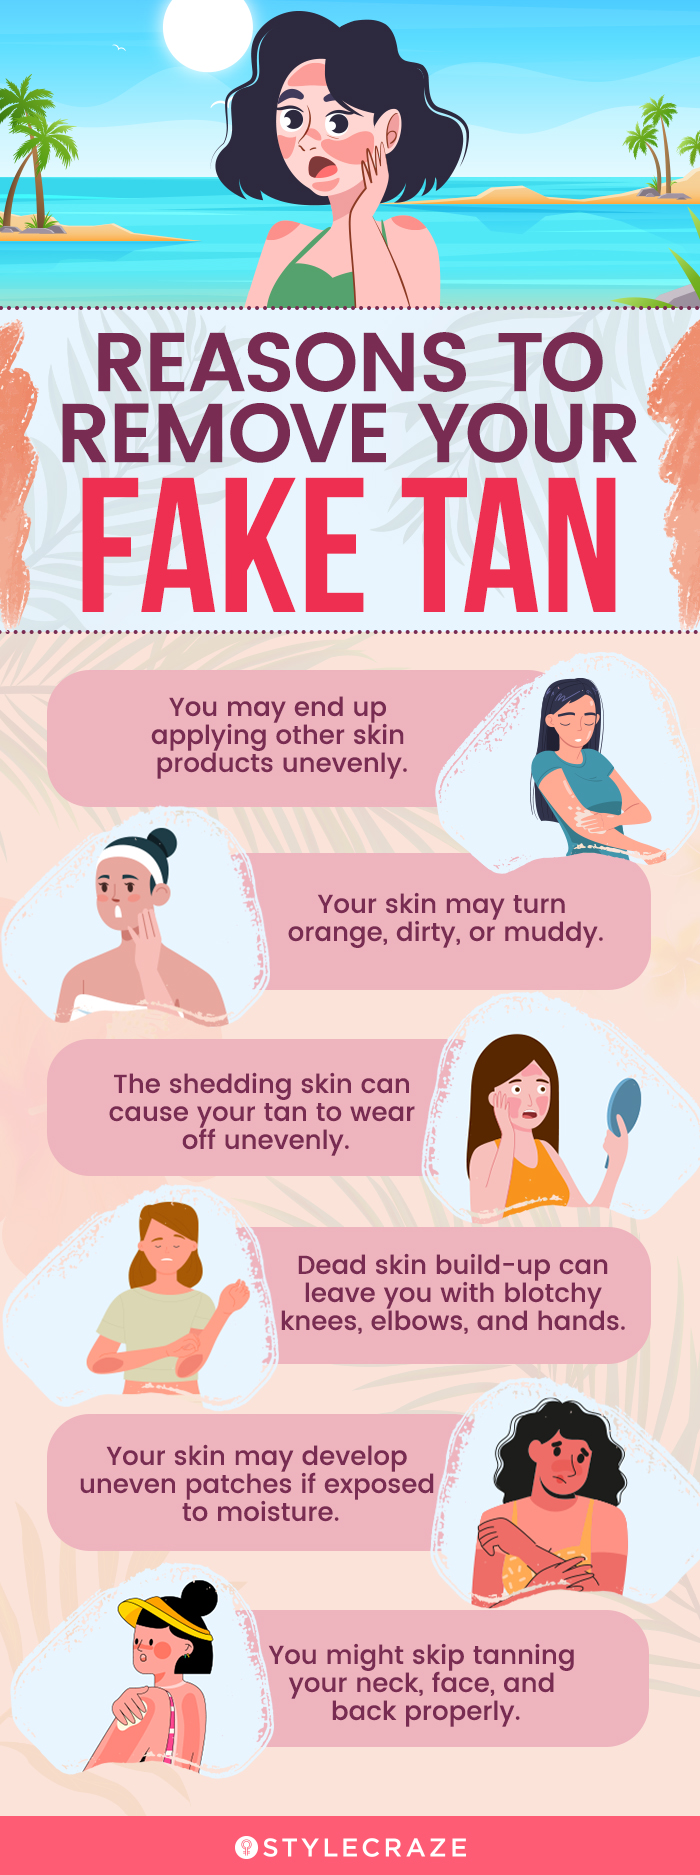 reasons to remove your fake tan (infographic)